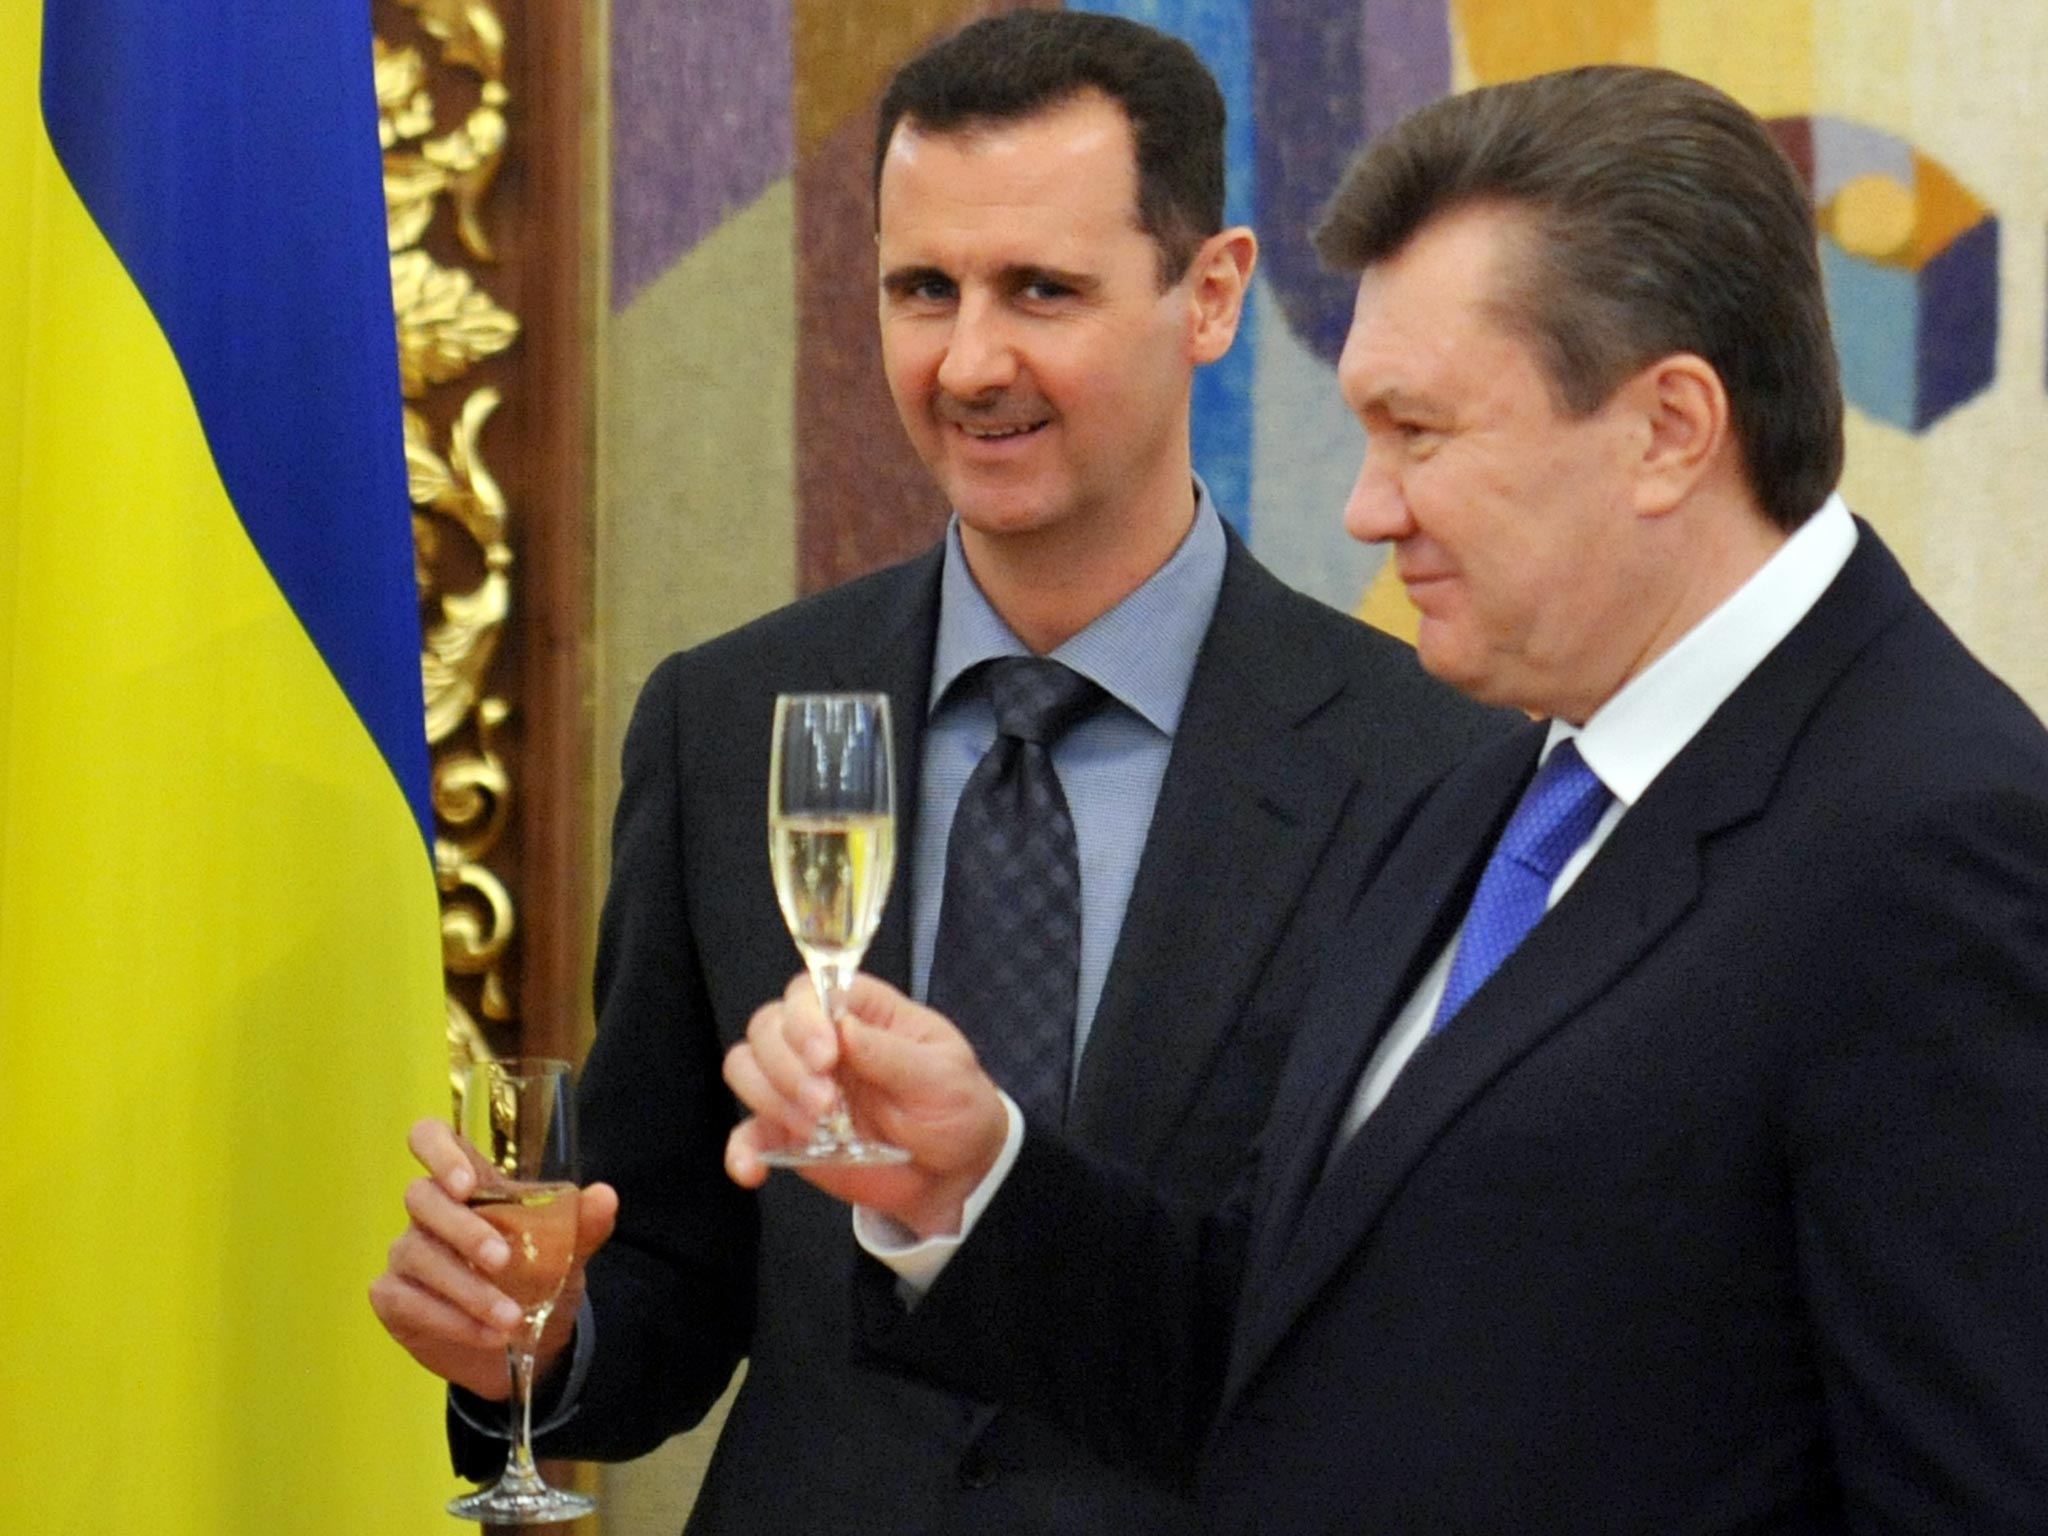 Bashar al-Assad with Viktor Yanukovych after signing a free trade
agreement in Kiev in December 2010